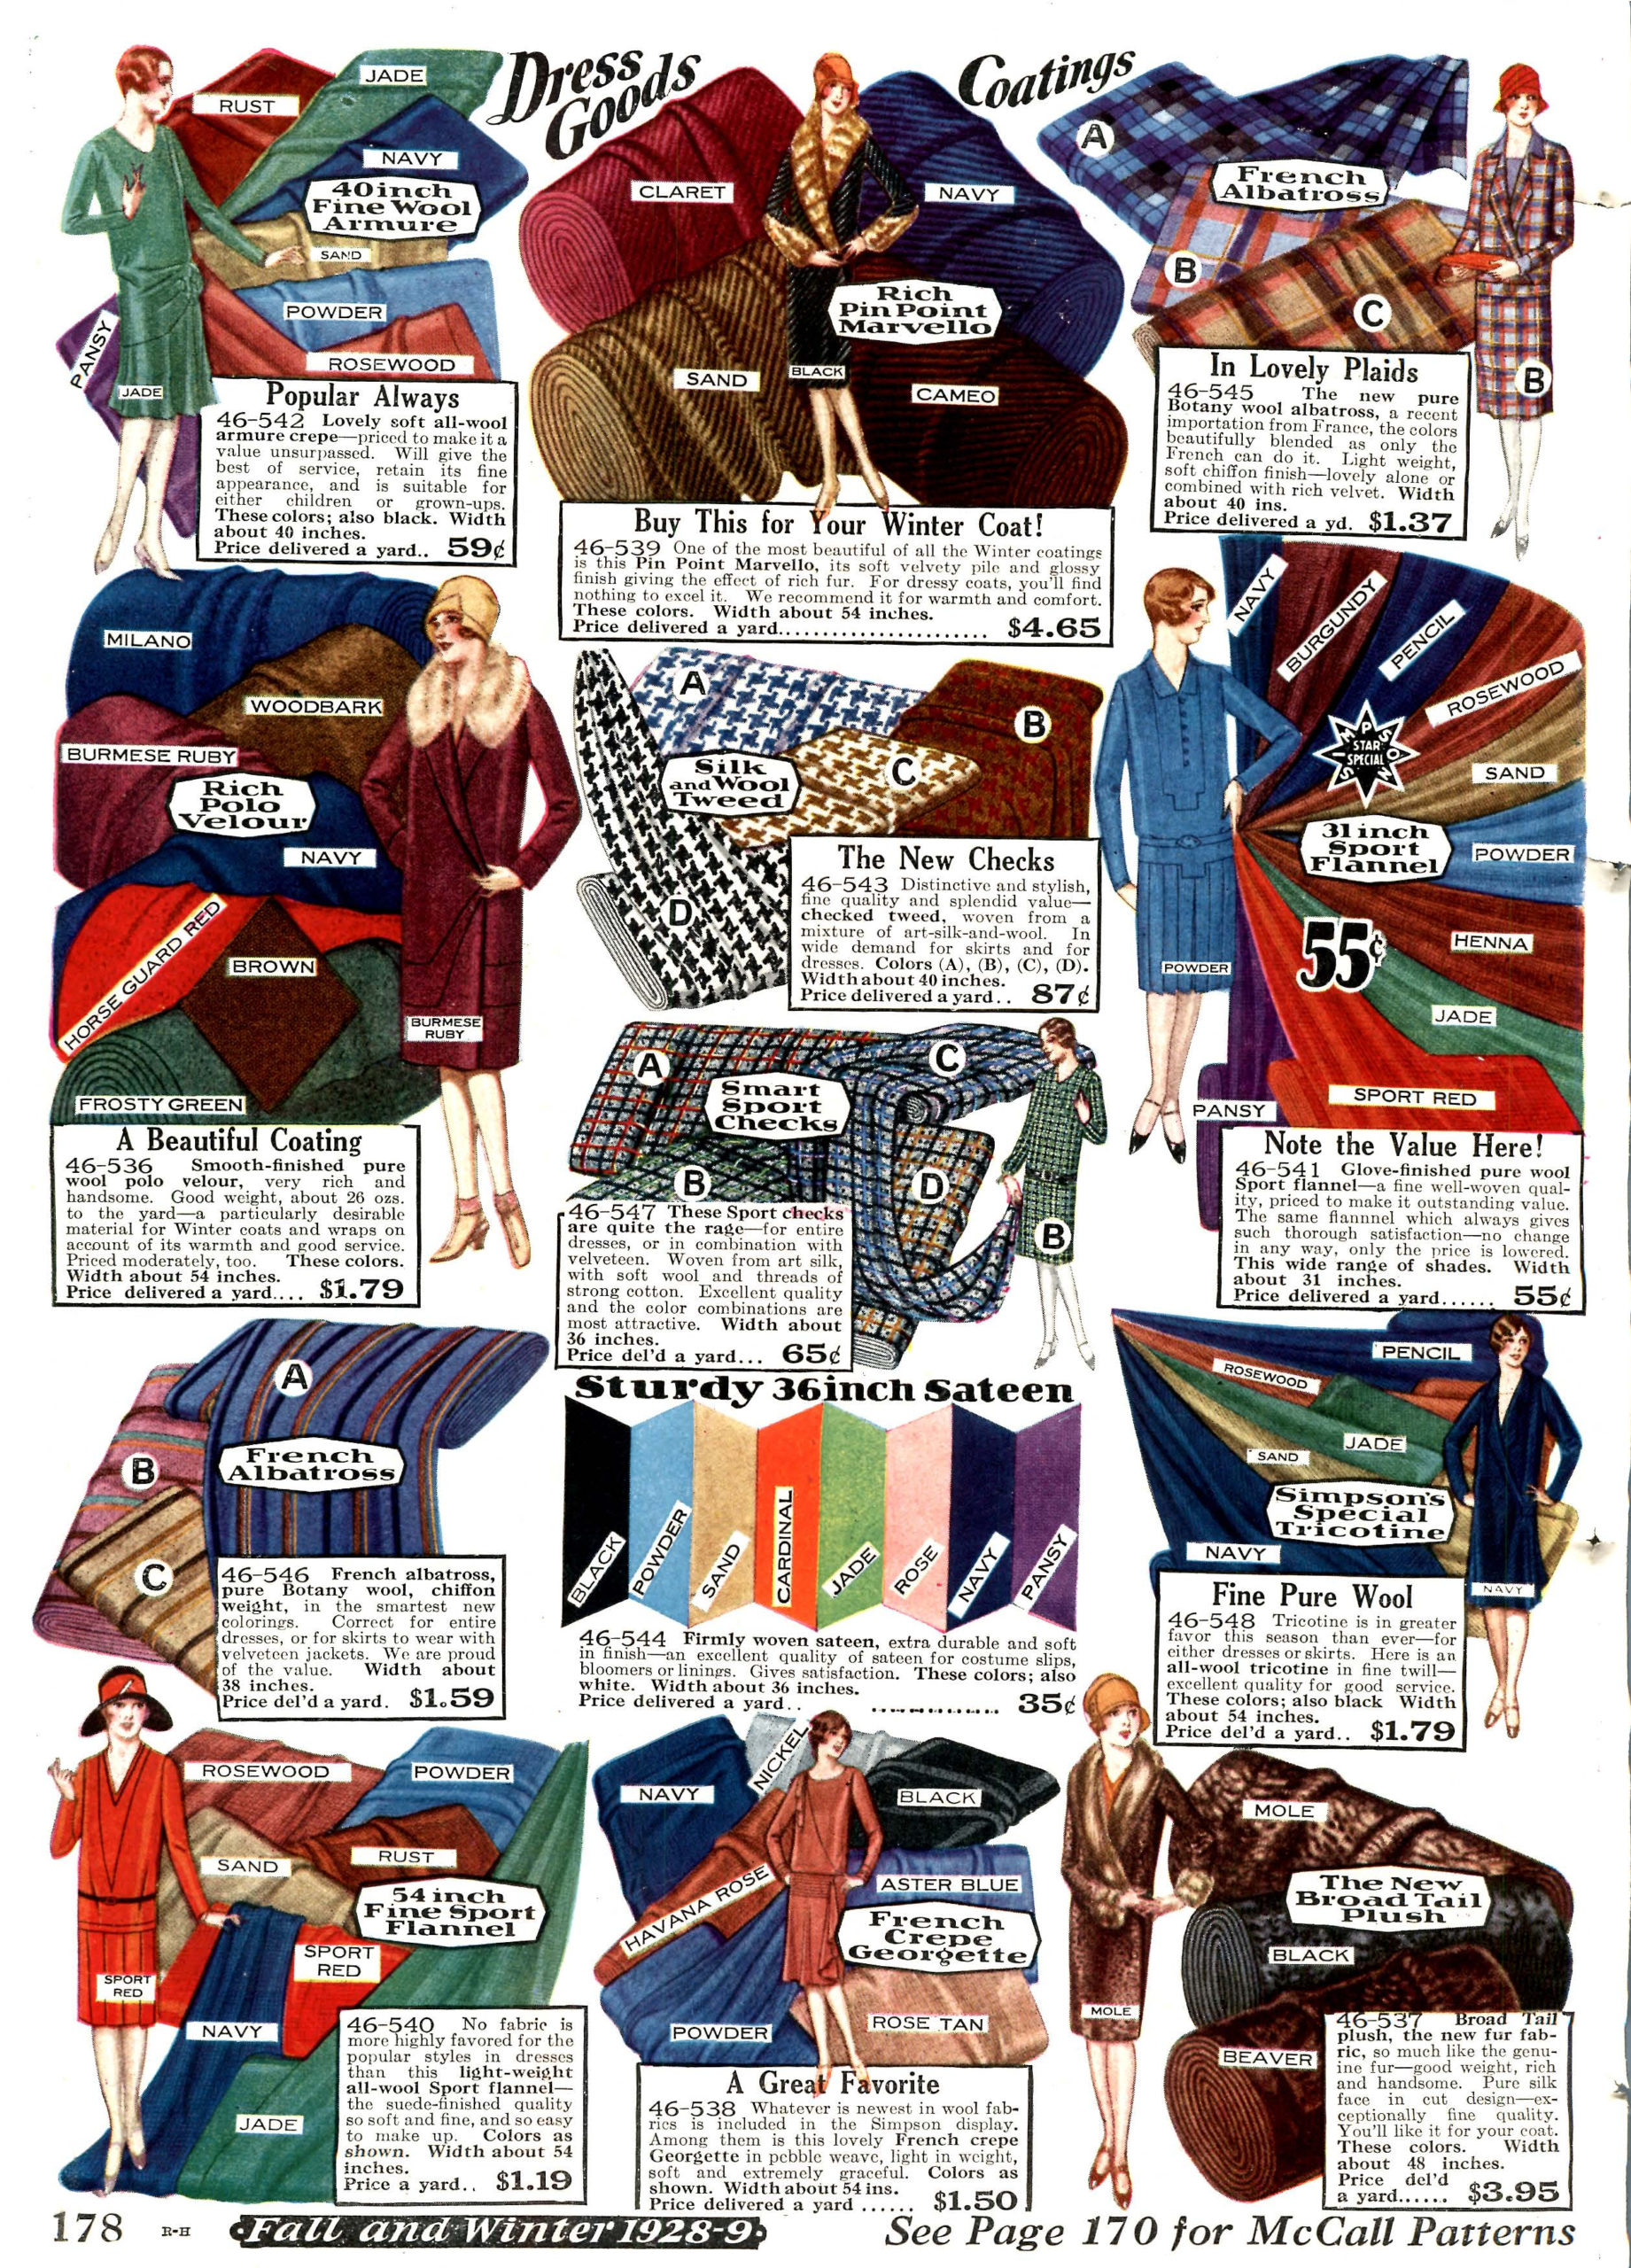 1920s Fabrics and Colors in Fashion